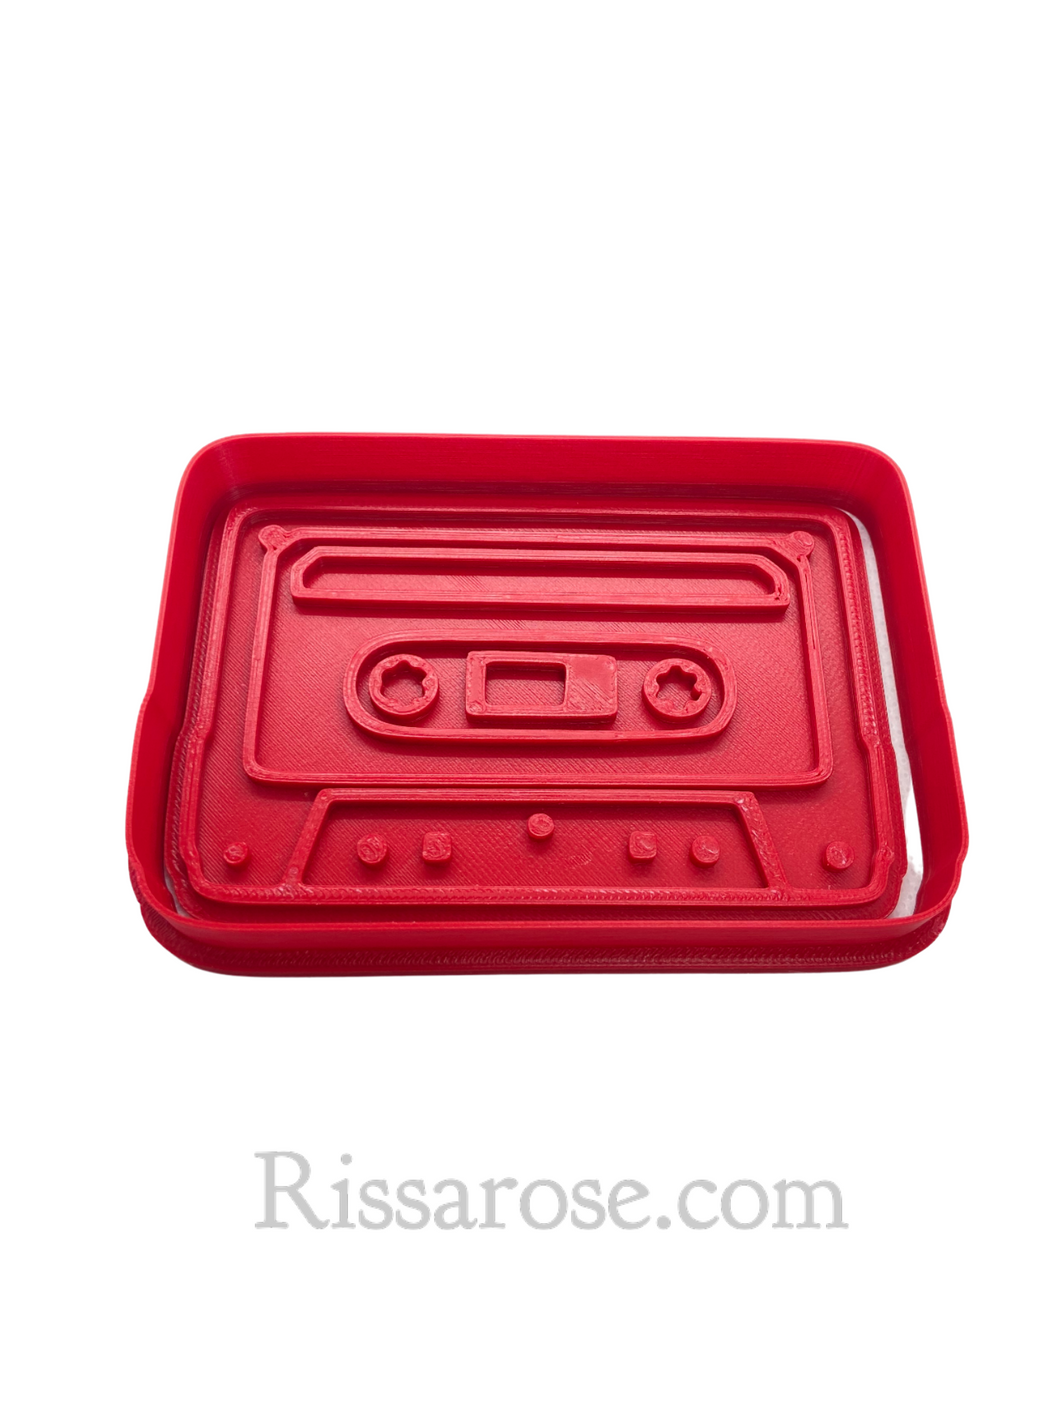 cassette game controllers cookie cutter and stamp - teen birthday music cassette